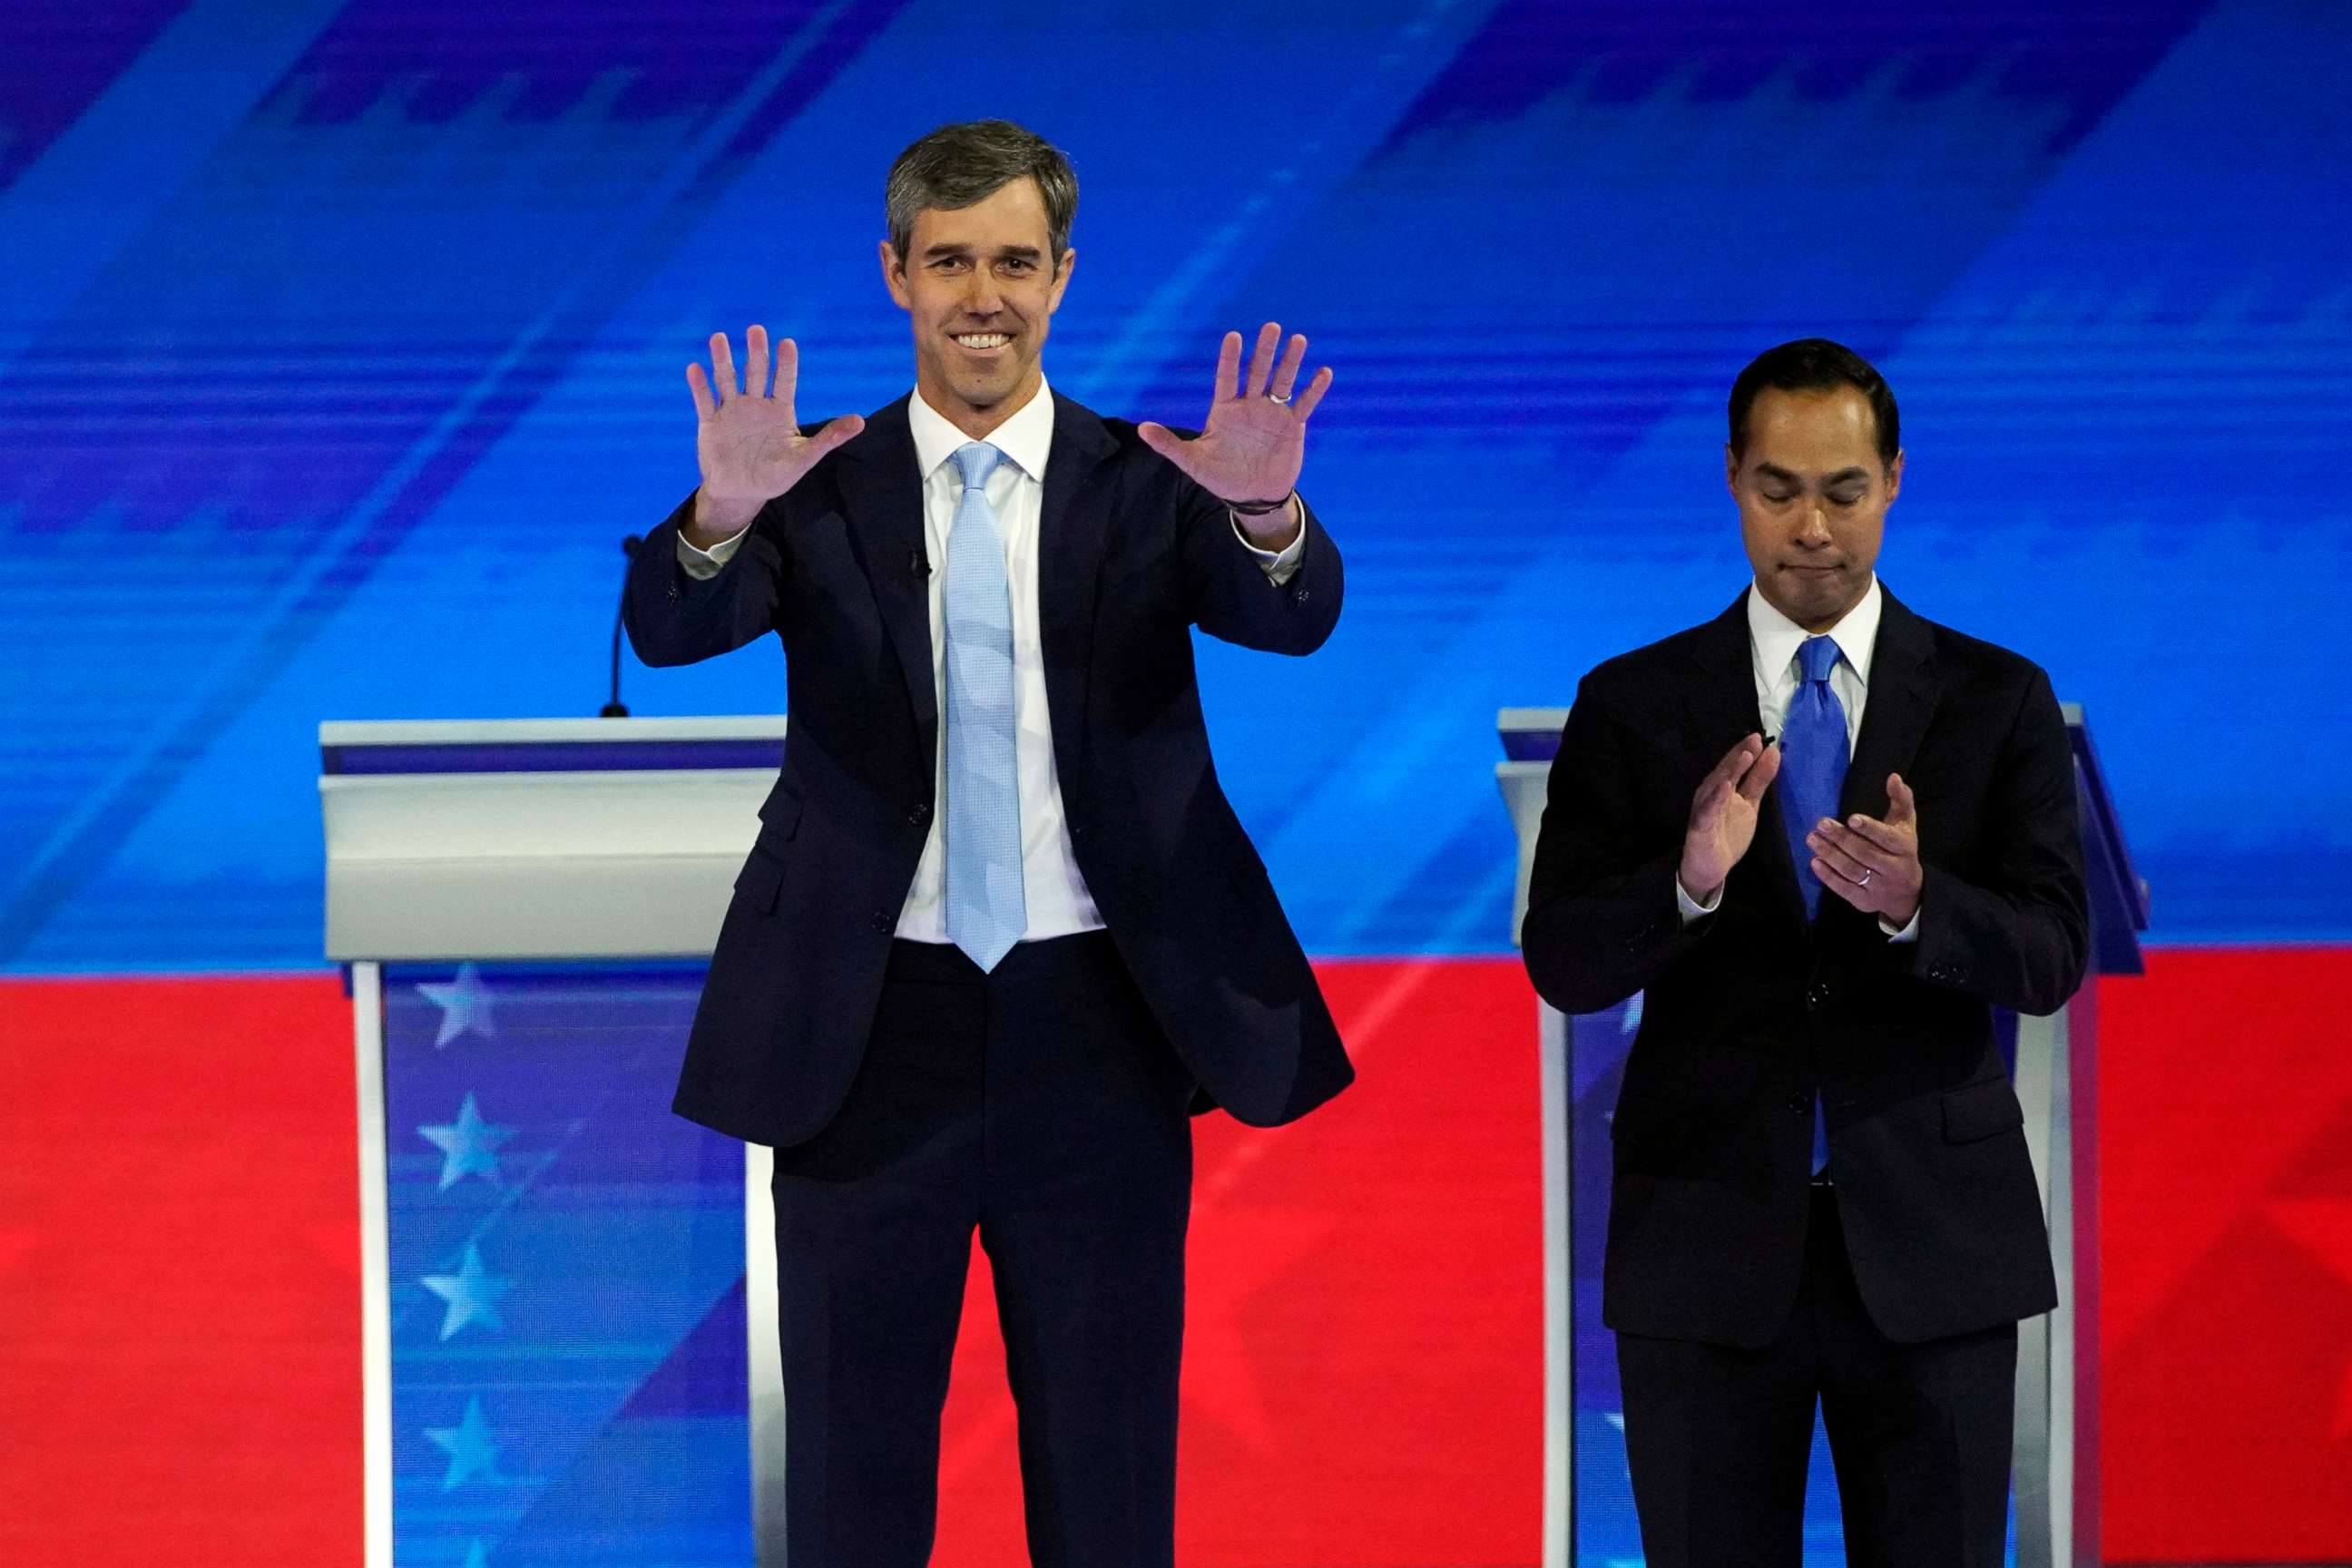 PHOTO: Former Texas Rep. Beto O'Rourke and former Housing and Urban Development Secretary Julian Castro take the stage on Sept. 12, 2019, during a Democratic presidential primary debate in Houston.